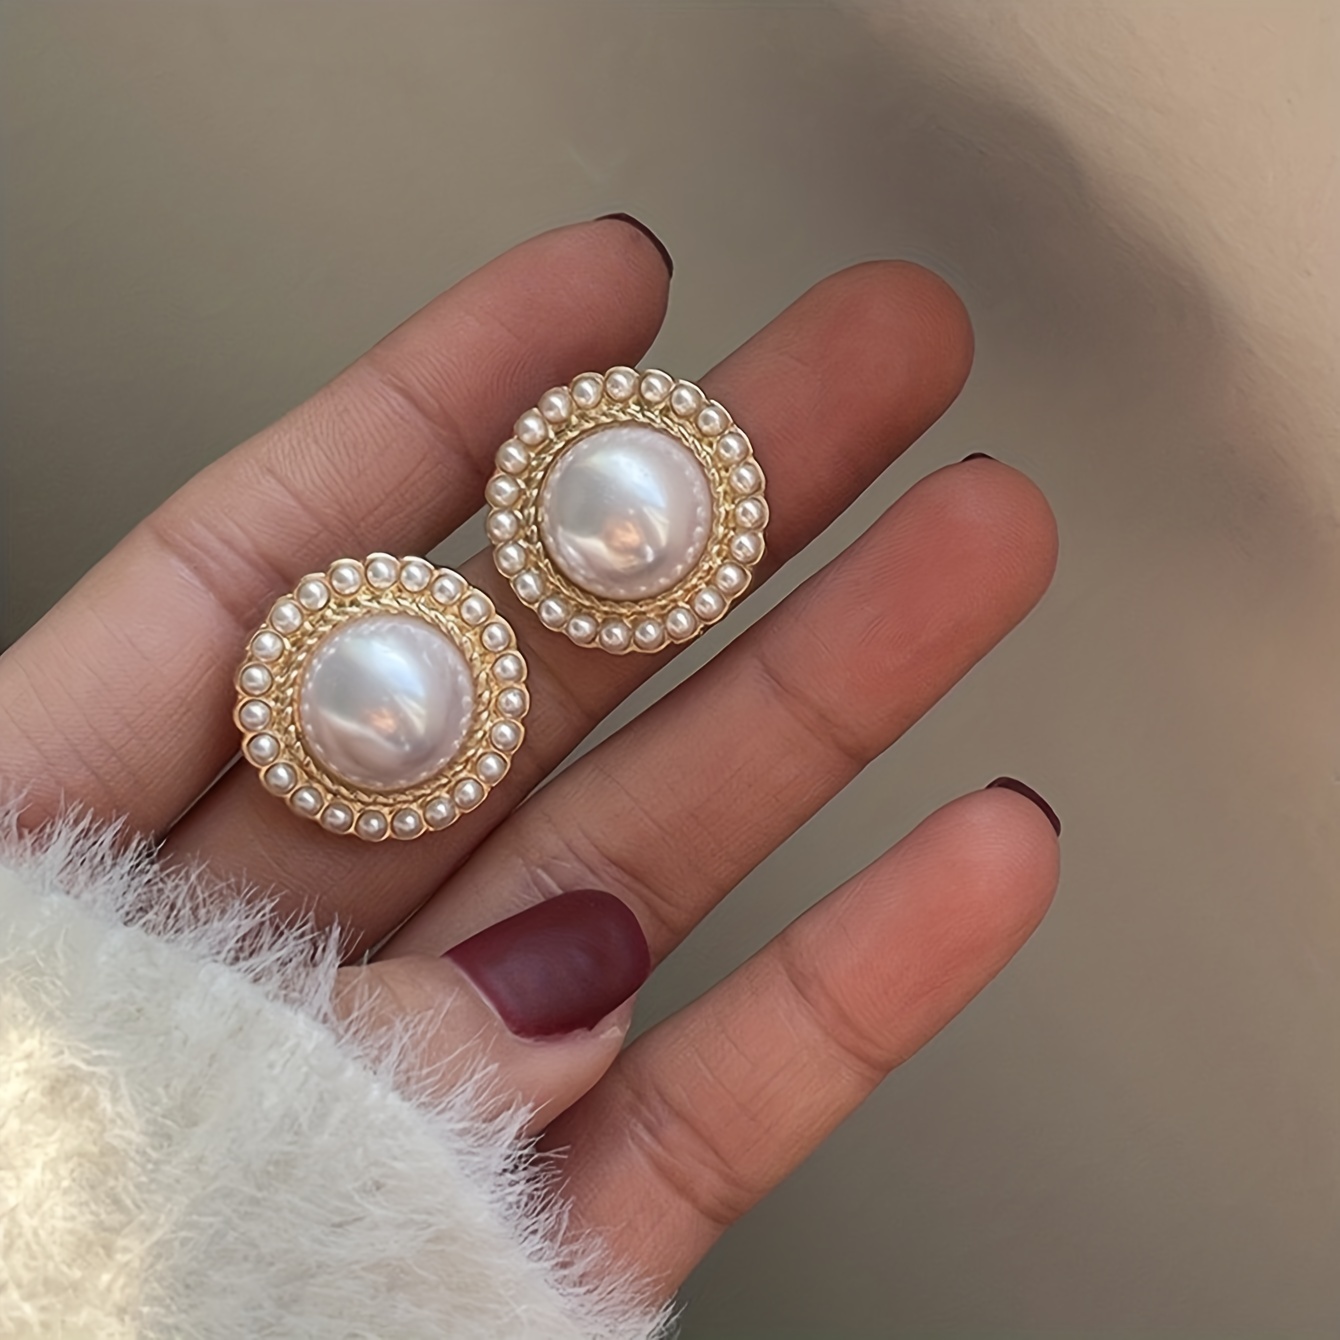 

Delicate Round Stud Earrings With Imitation Pearl Design Zinc Alloy Jewelry Vintage Elegant Style For Women Daily Party Ear Decor